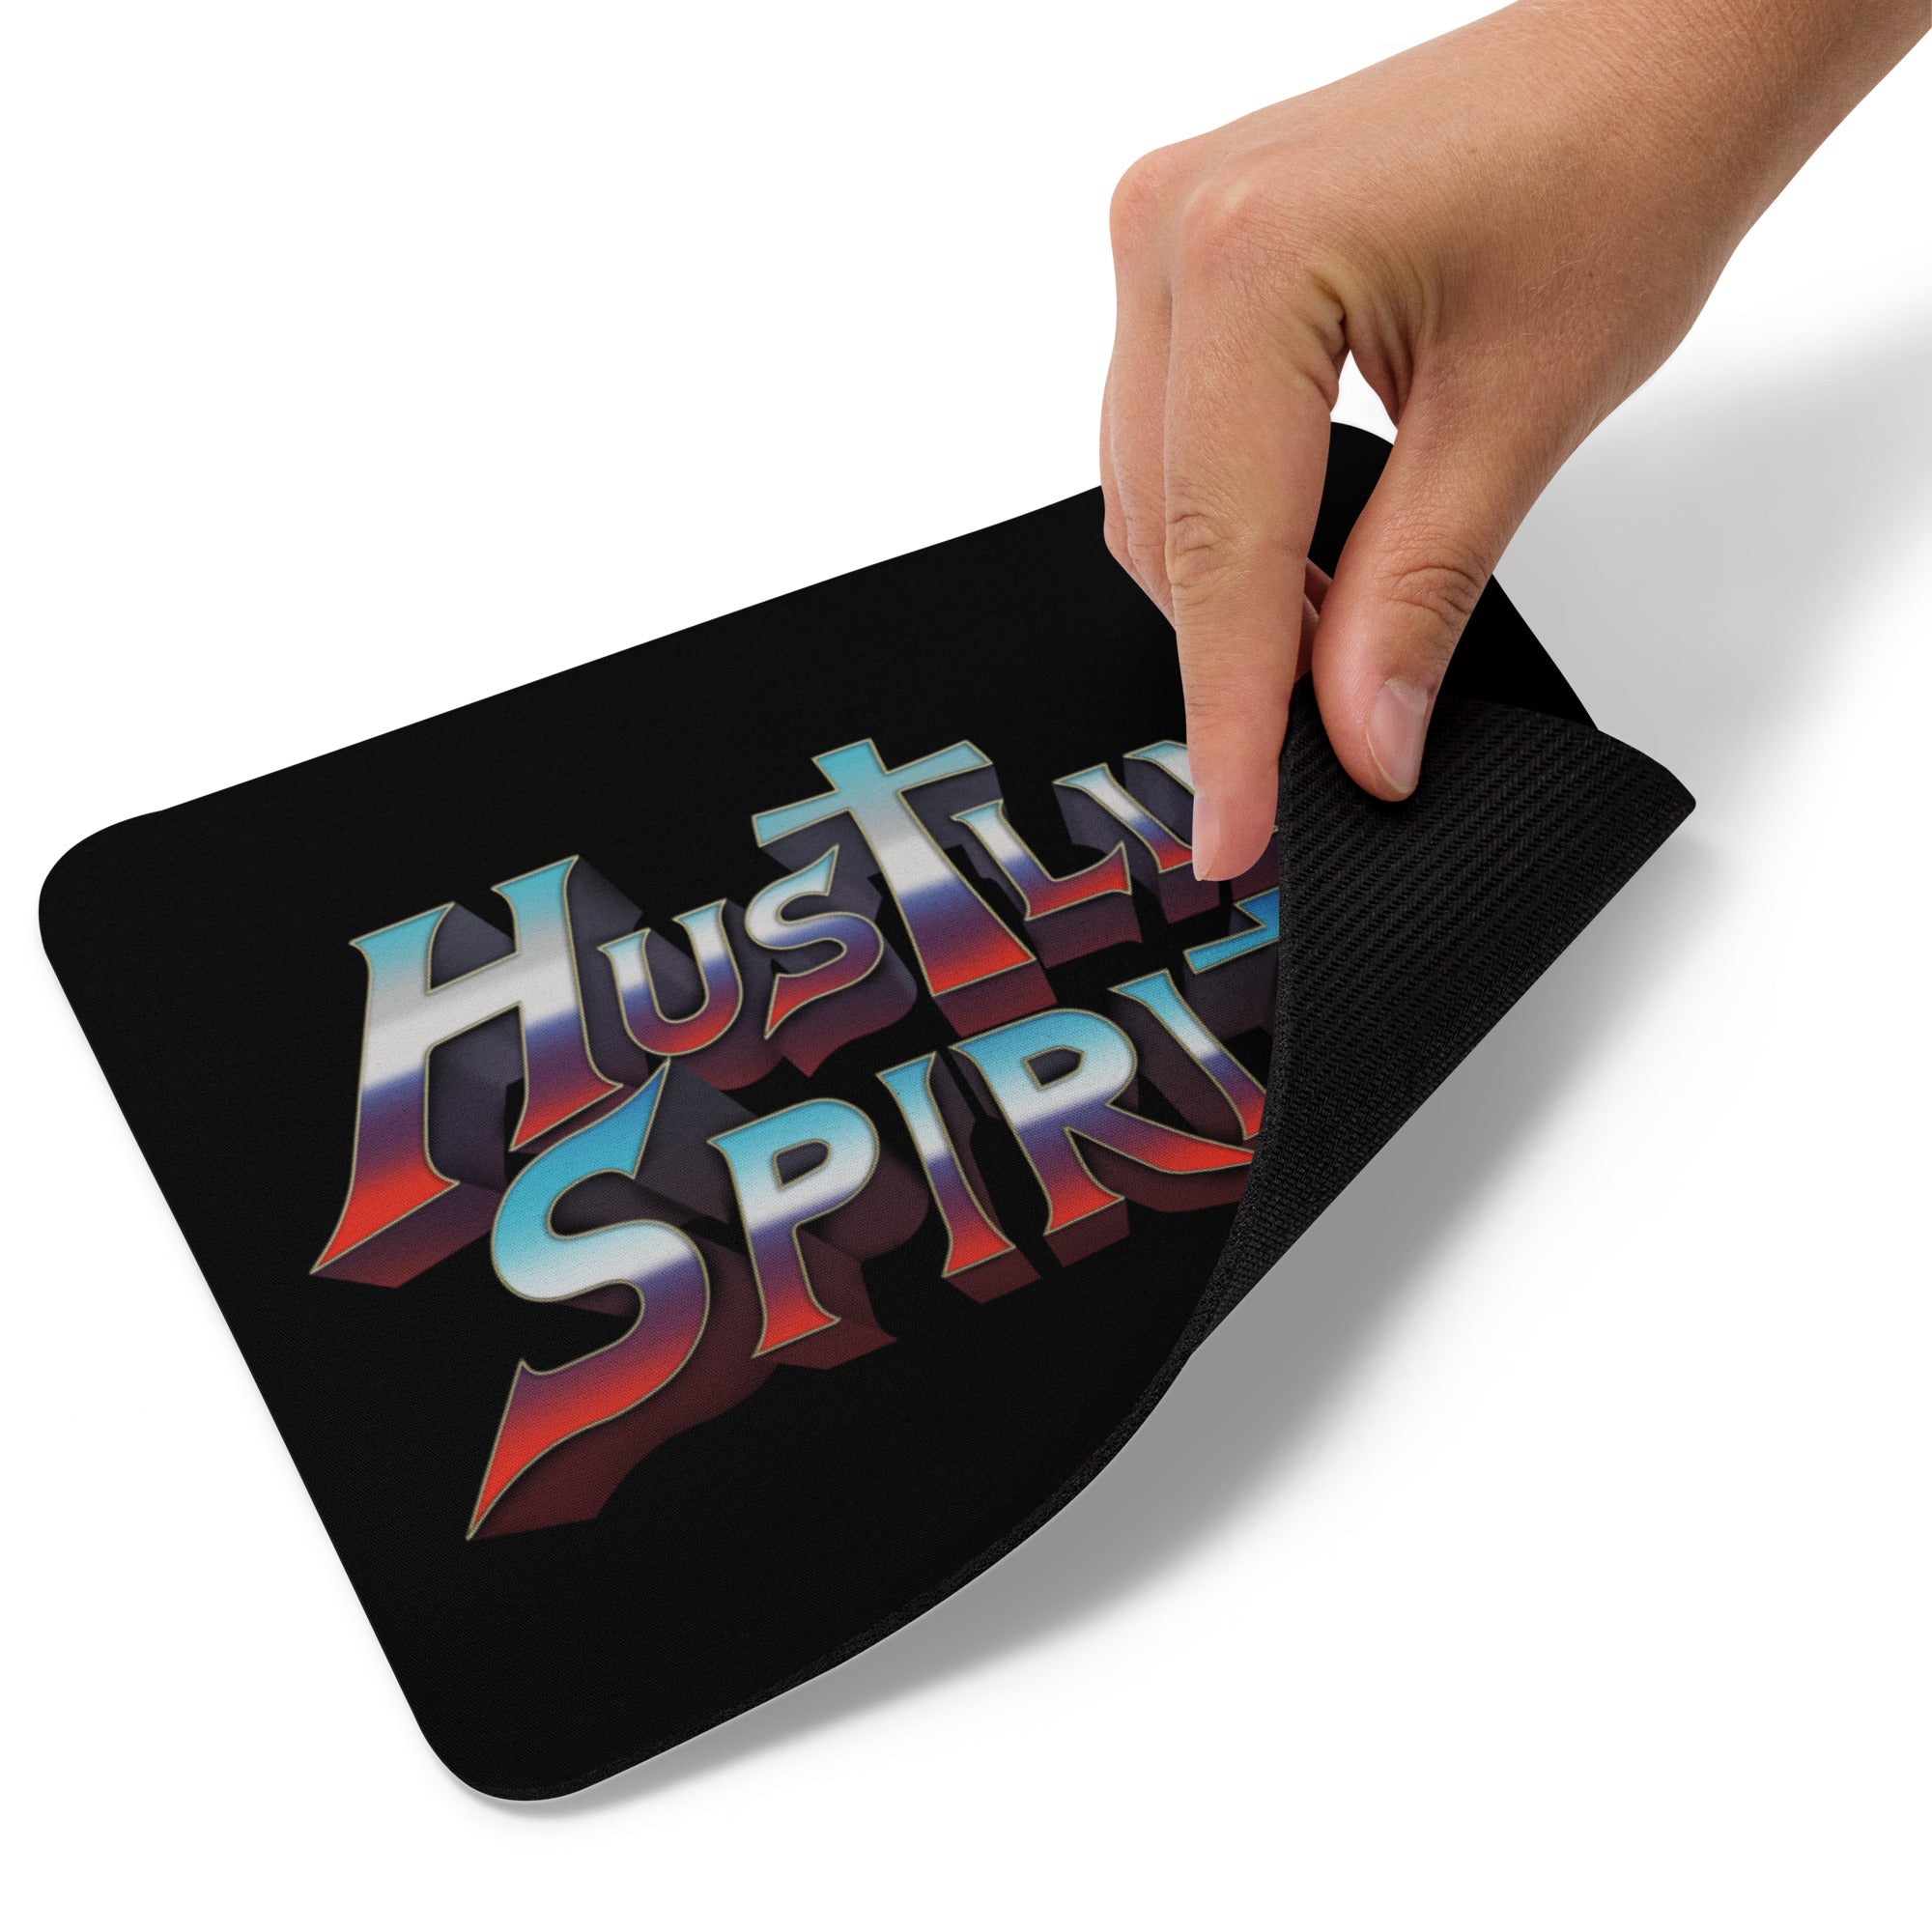 Mouse pad